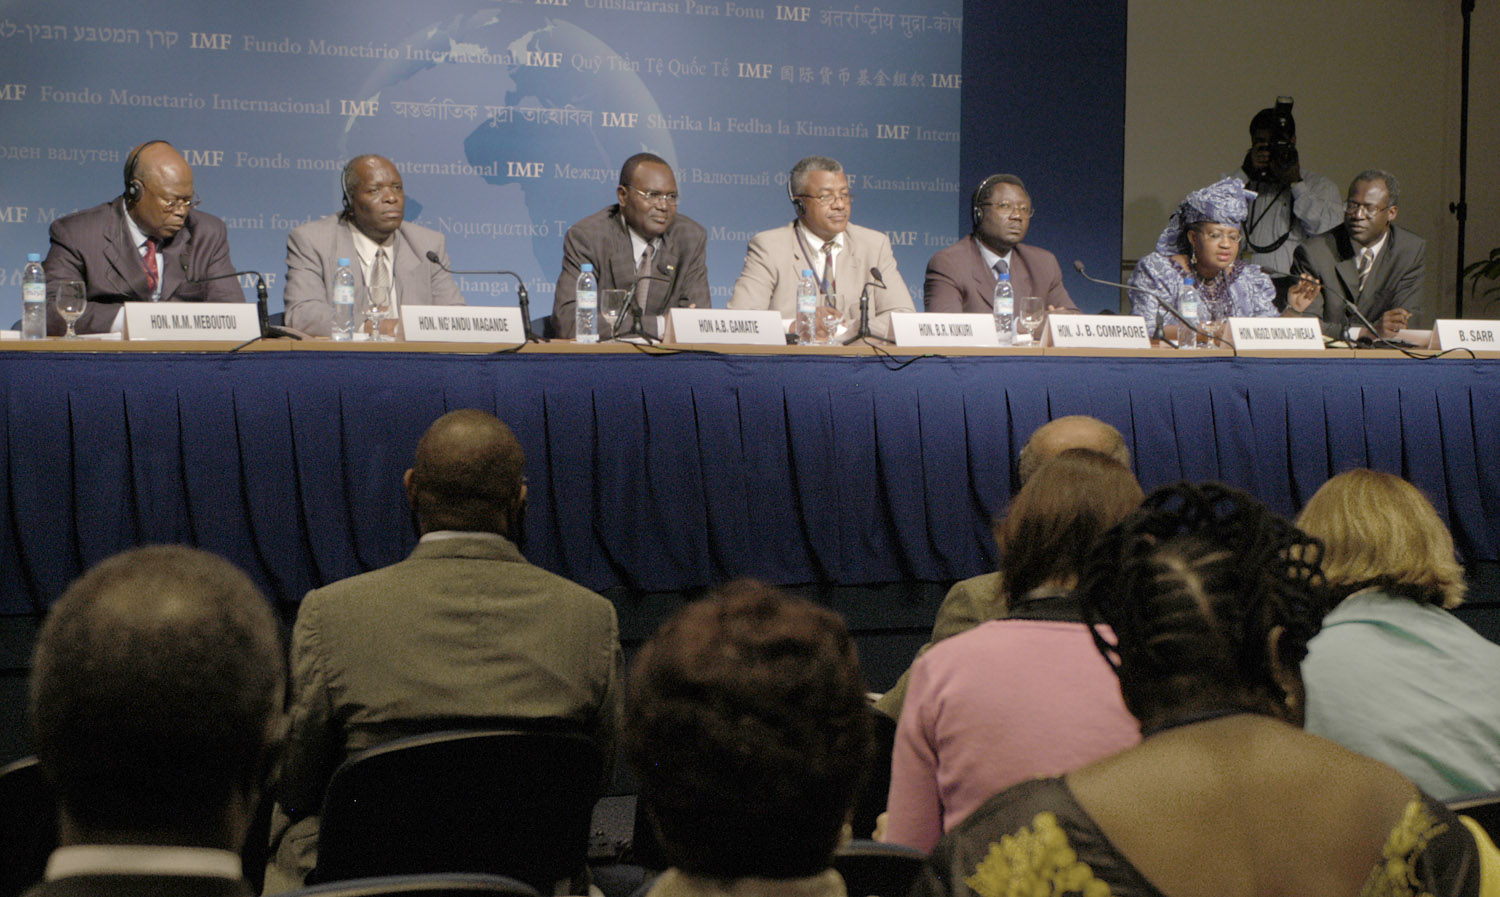 African Finance Ministers IMF 2003 Annual Meeting - IMF 62ph030920GH.jpg